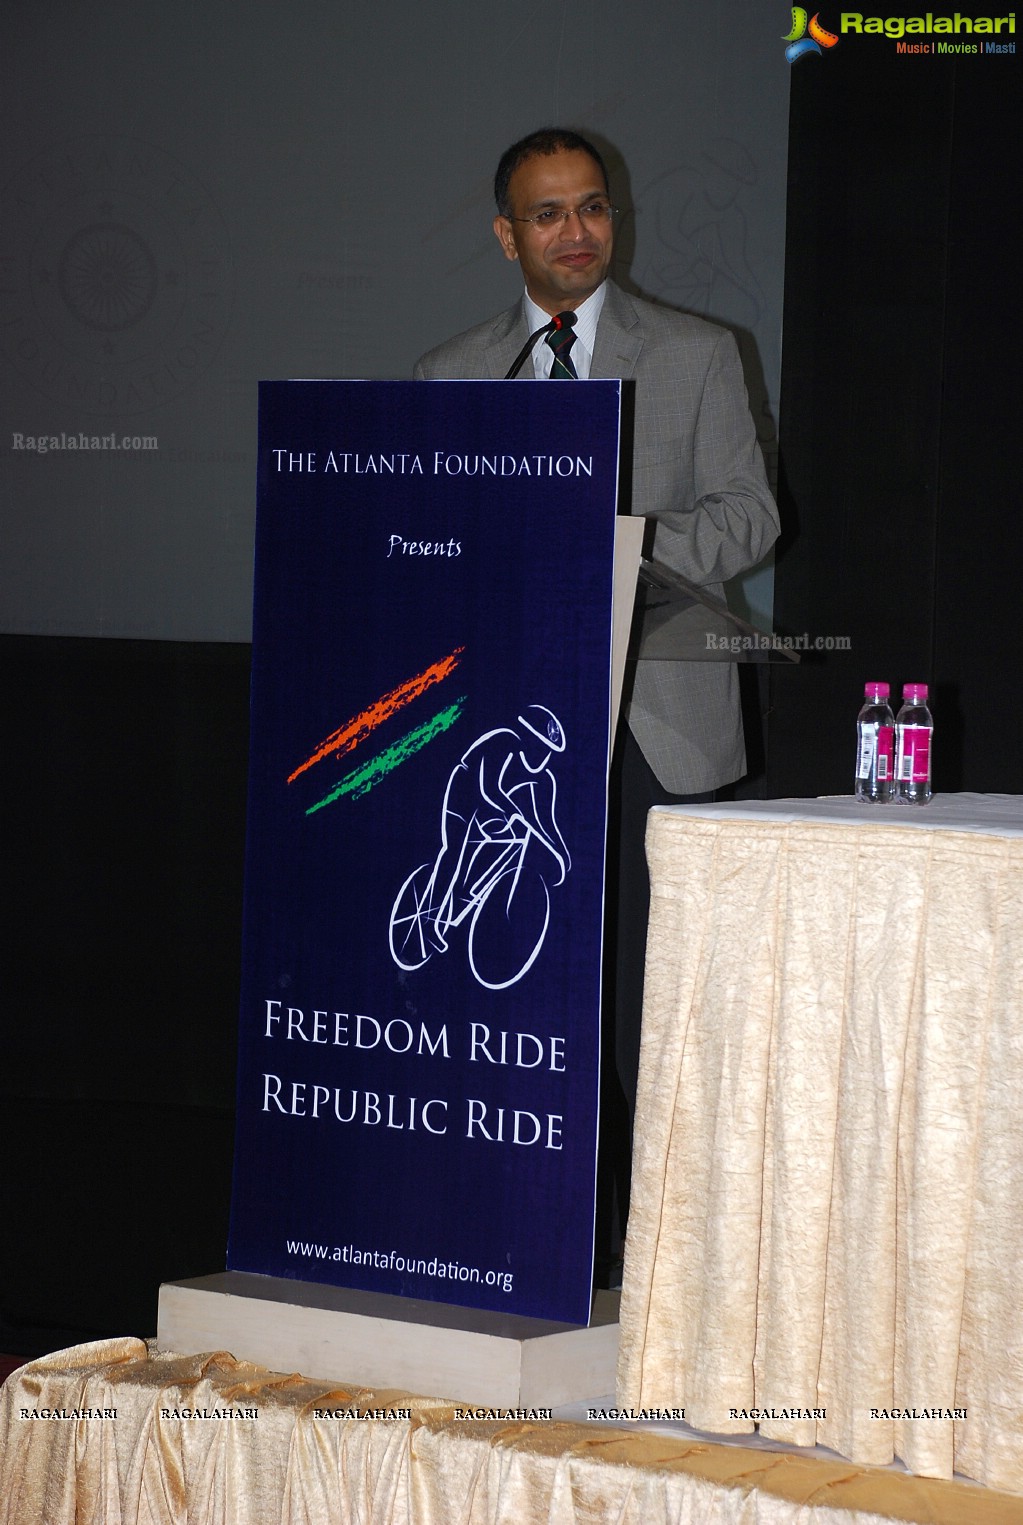 The Atlanta Foundation, 4th Edition of the Freedom Ride